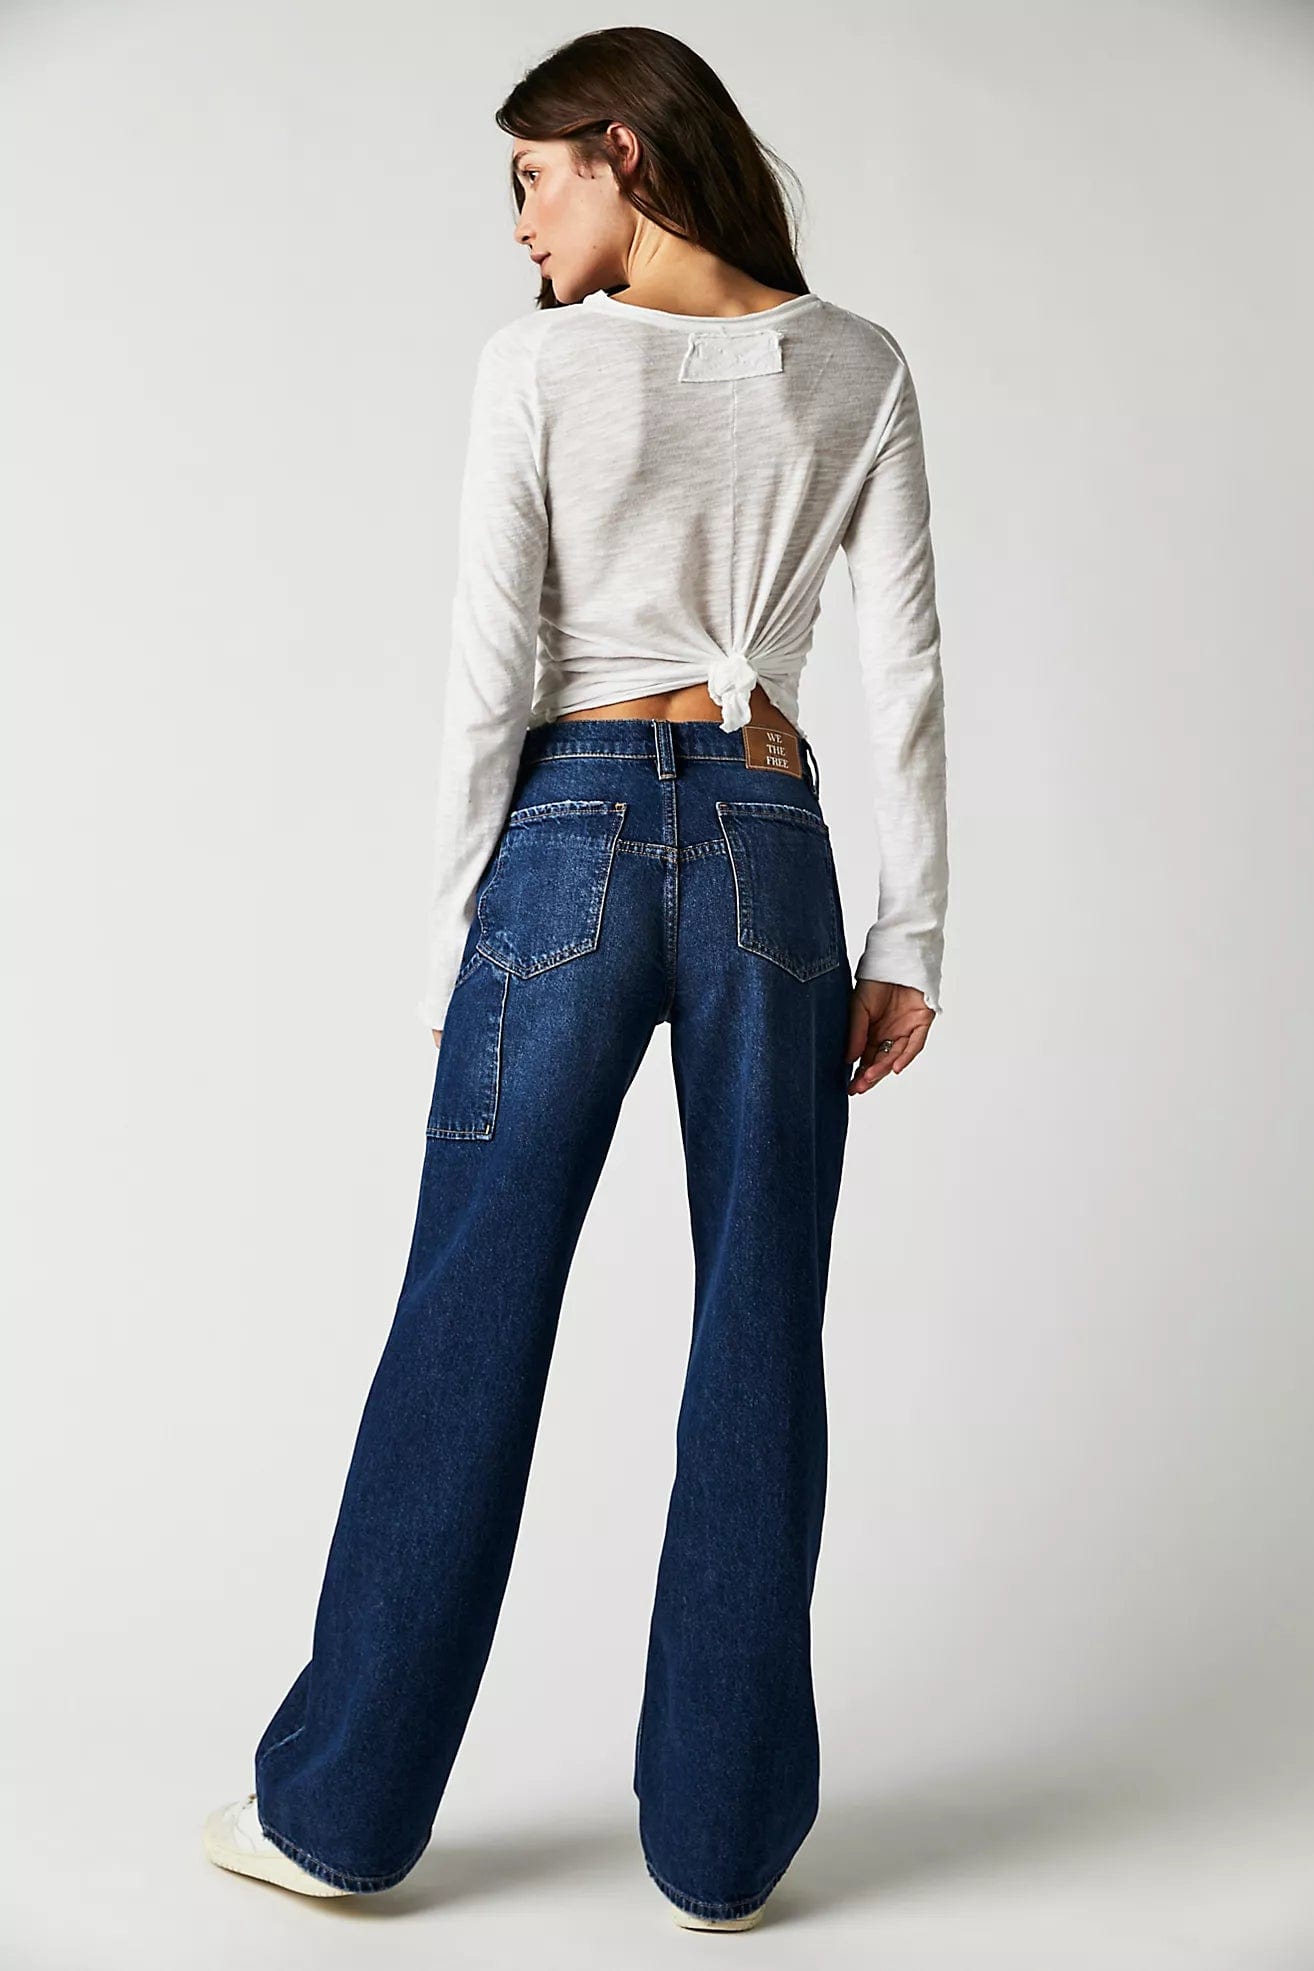 Free People Tinsley Baggy High-Rise Jean